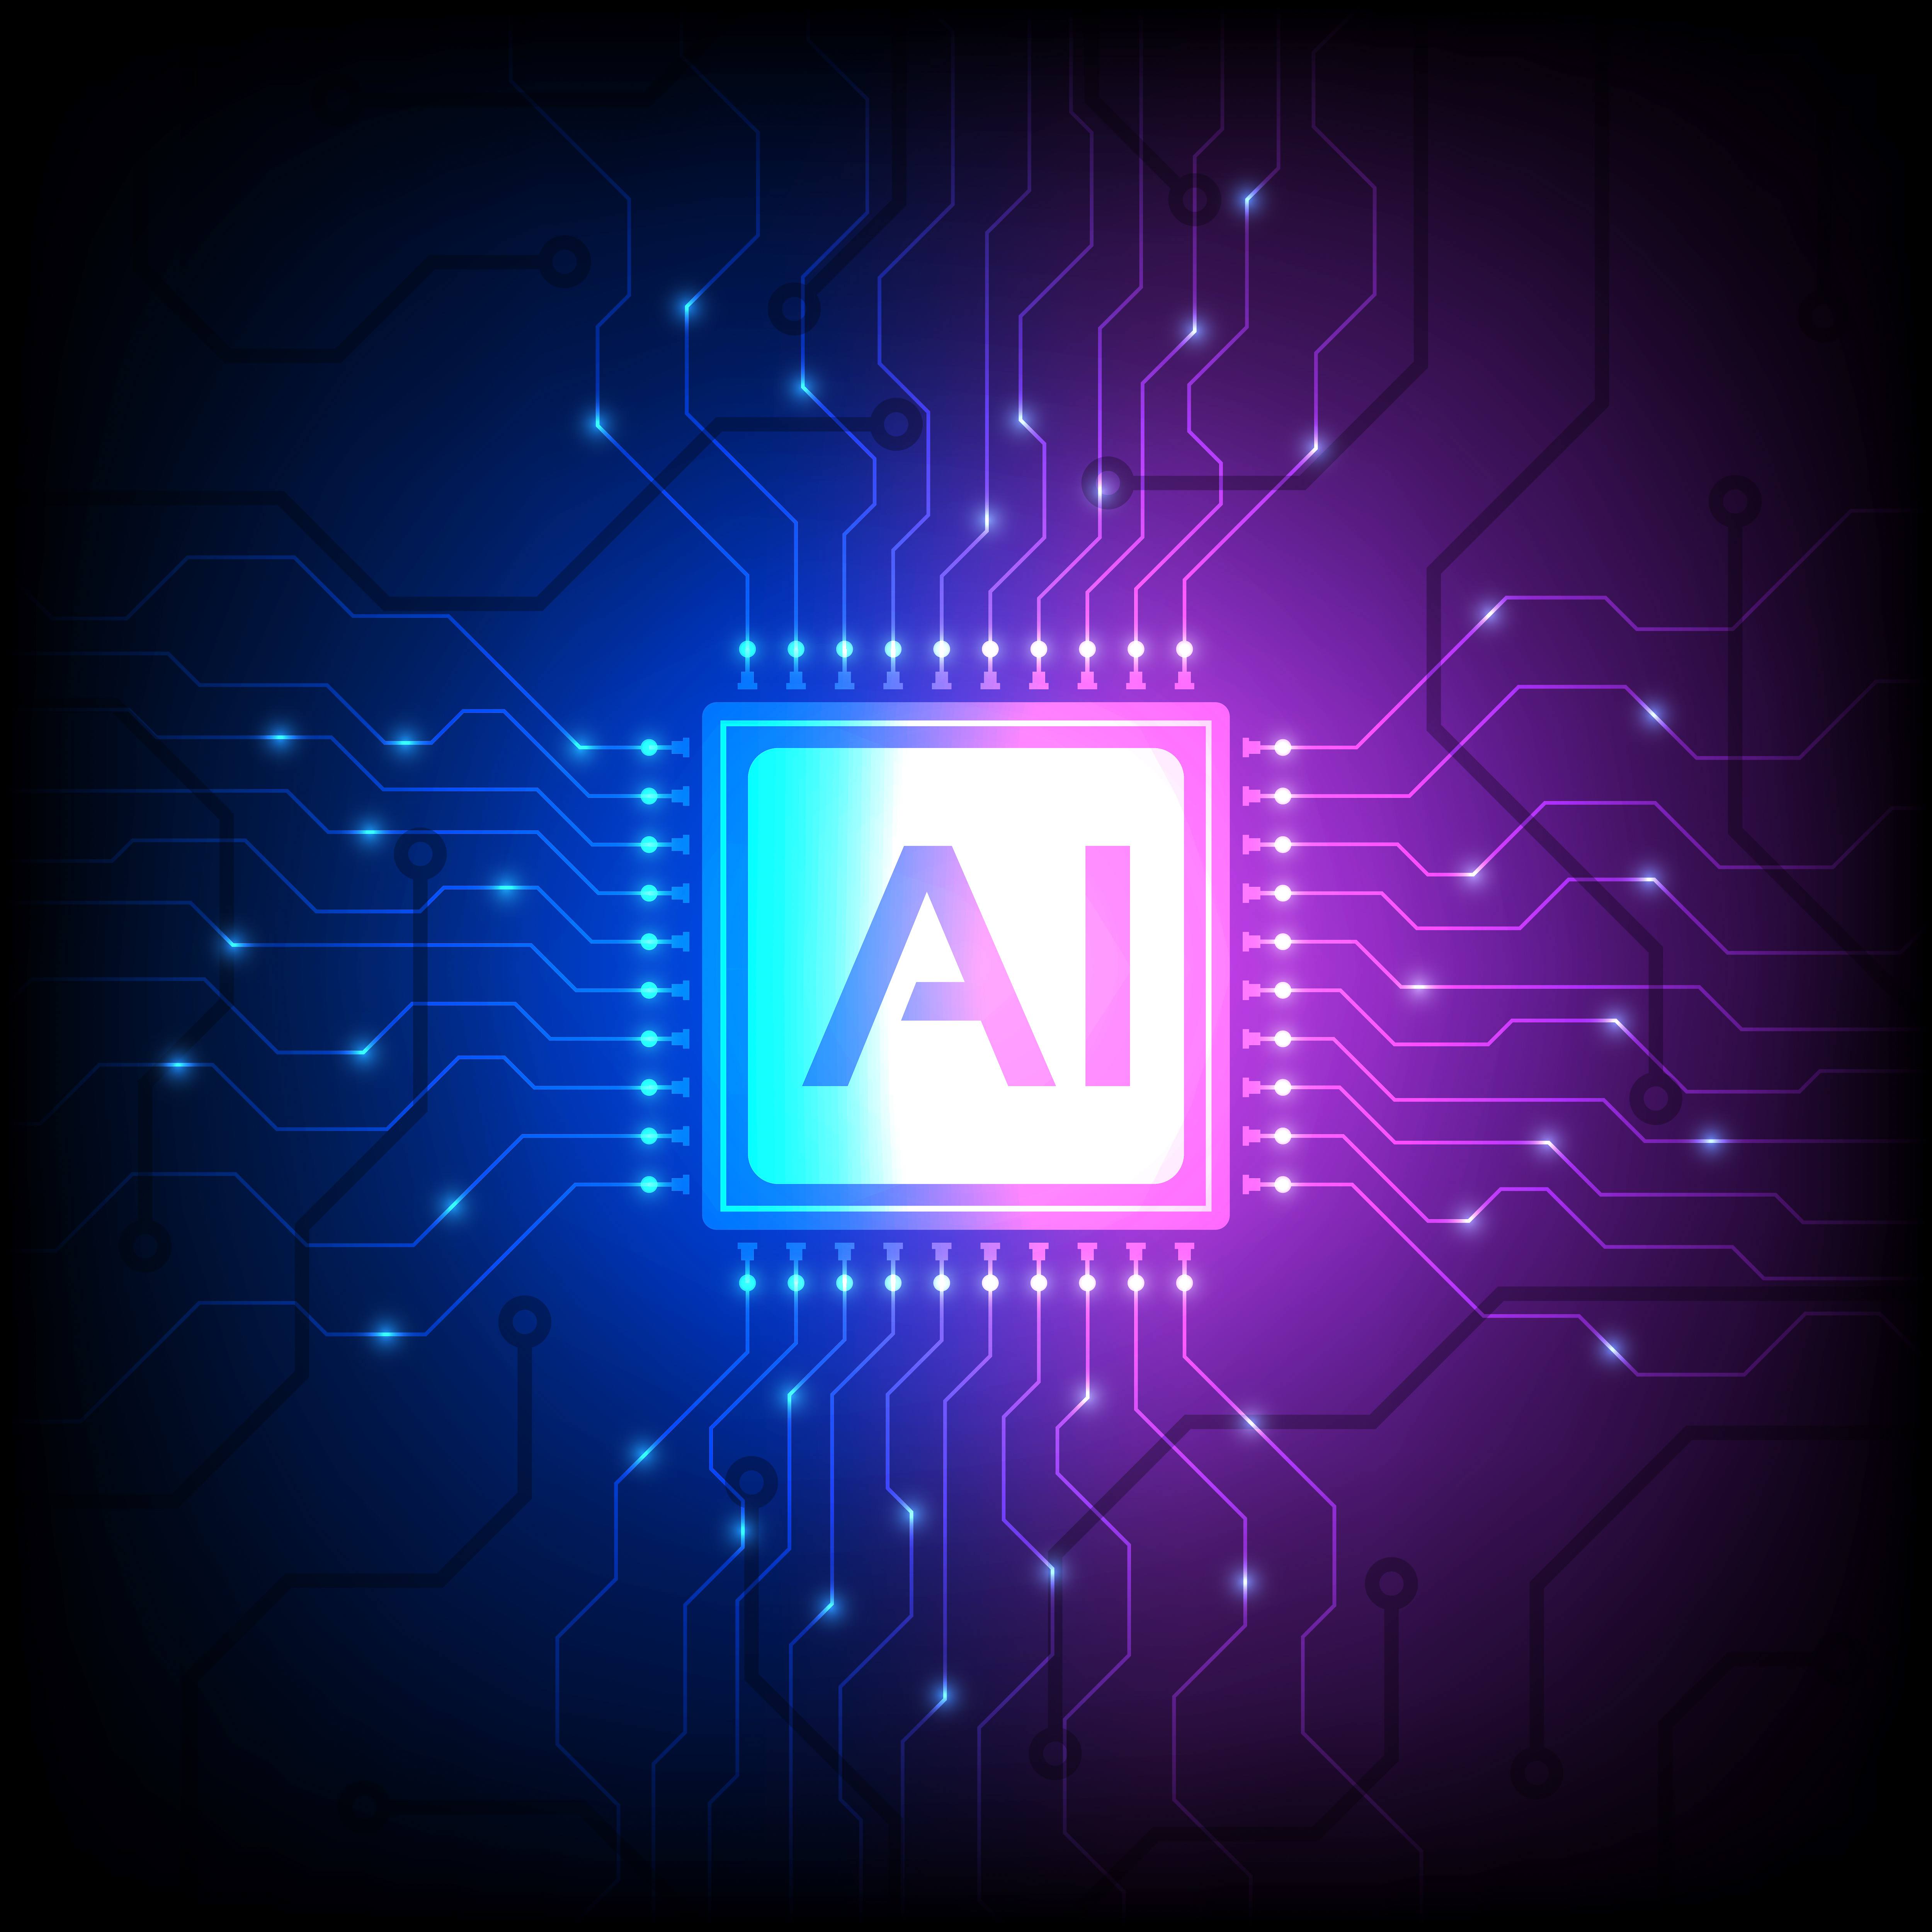 What is AI?